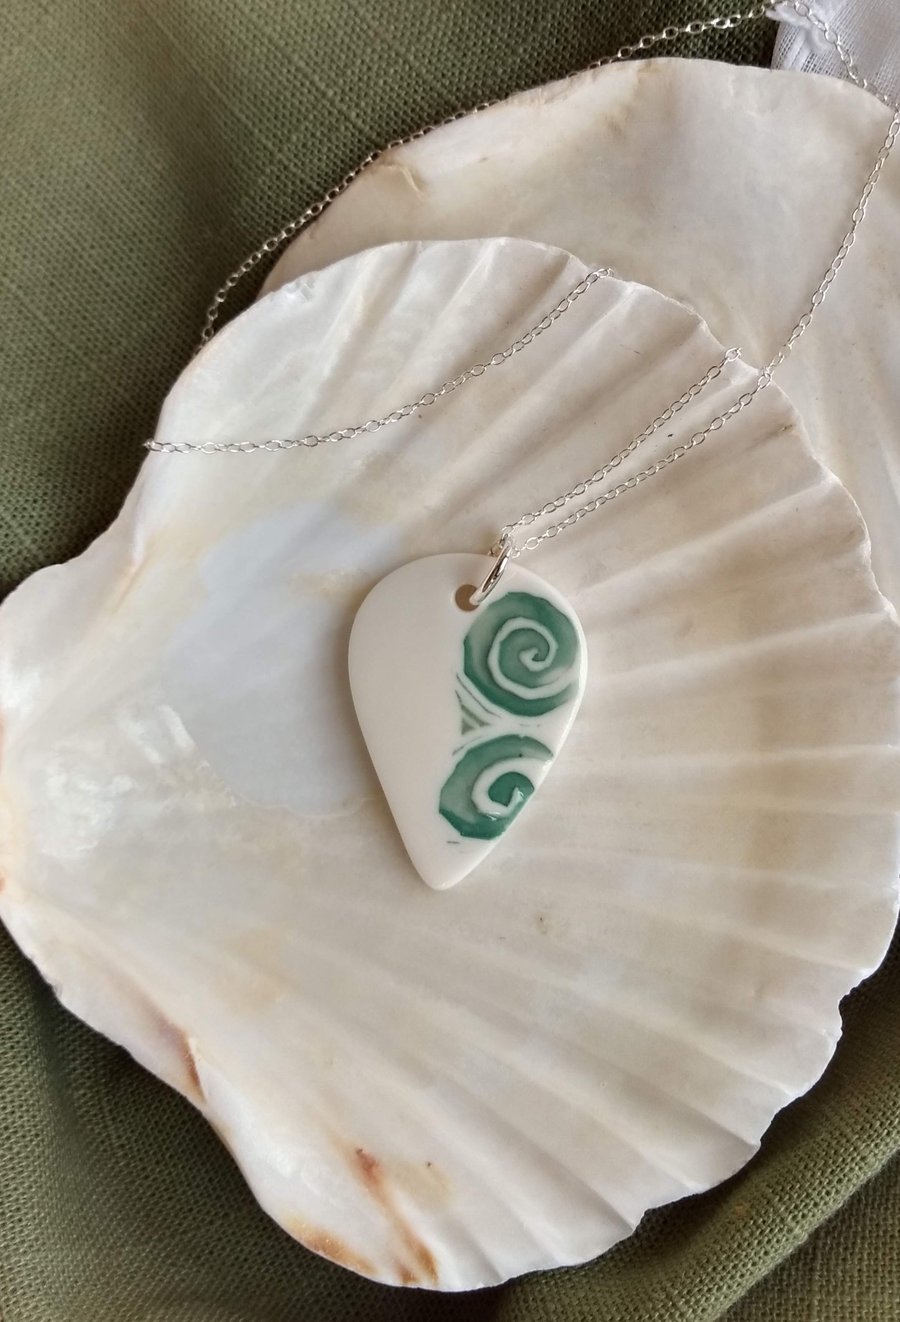 Porcelain Ceramic Droplet Necklace with Wave Design on a Sterling Silver Chain 